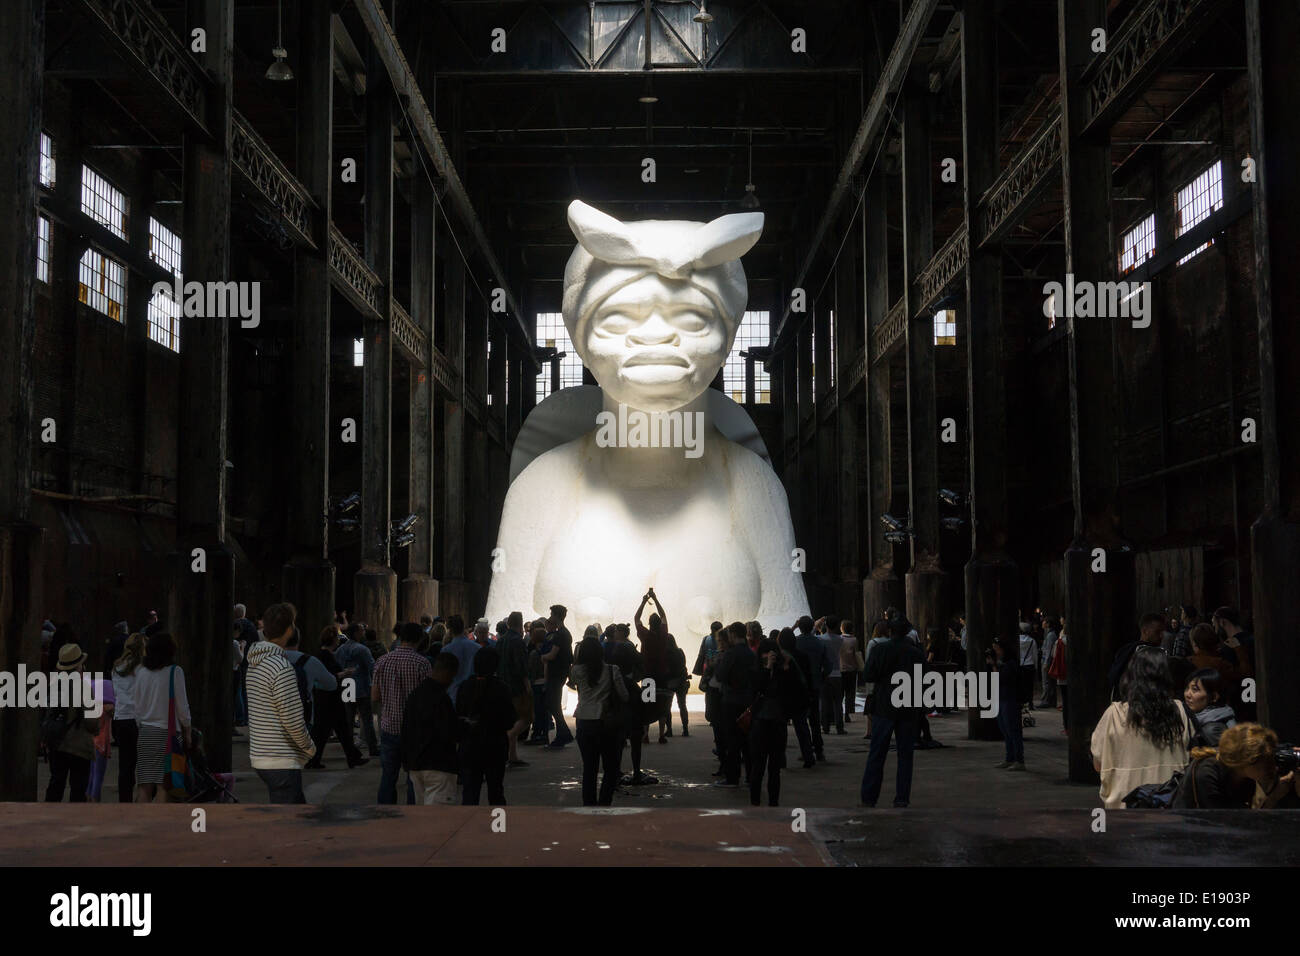 'A Subtlety' or 'The Marvelous Sugar Baby' by the artist Kara Walker is displayed in the former Domino Sugar Factory Stock Photo